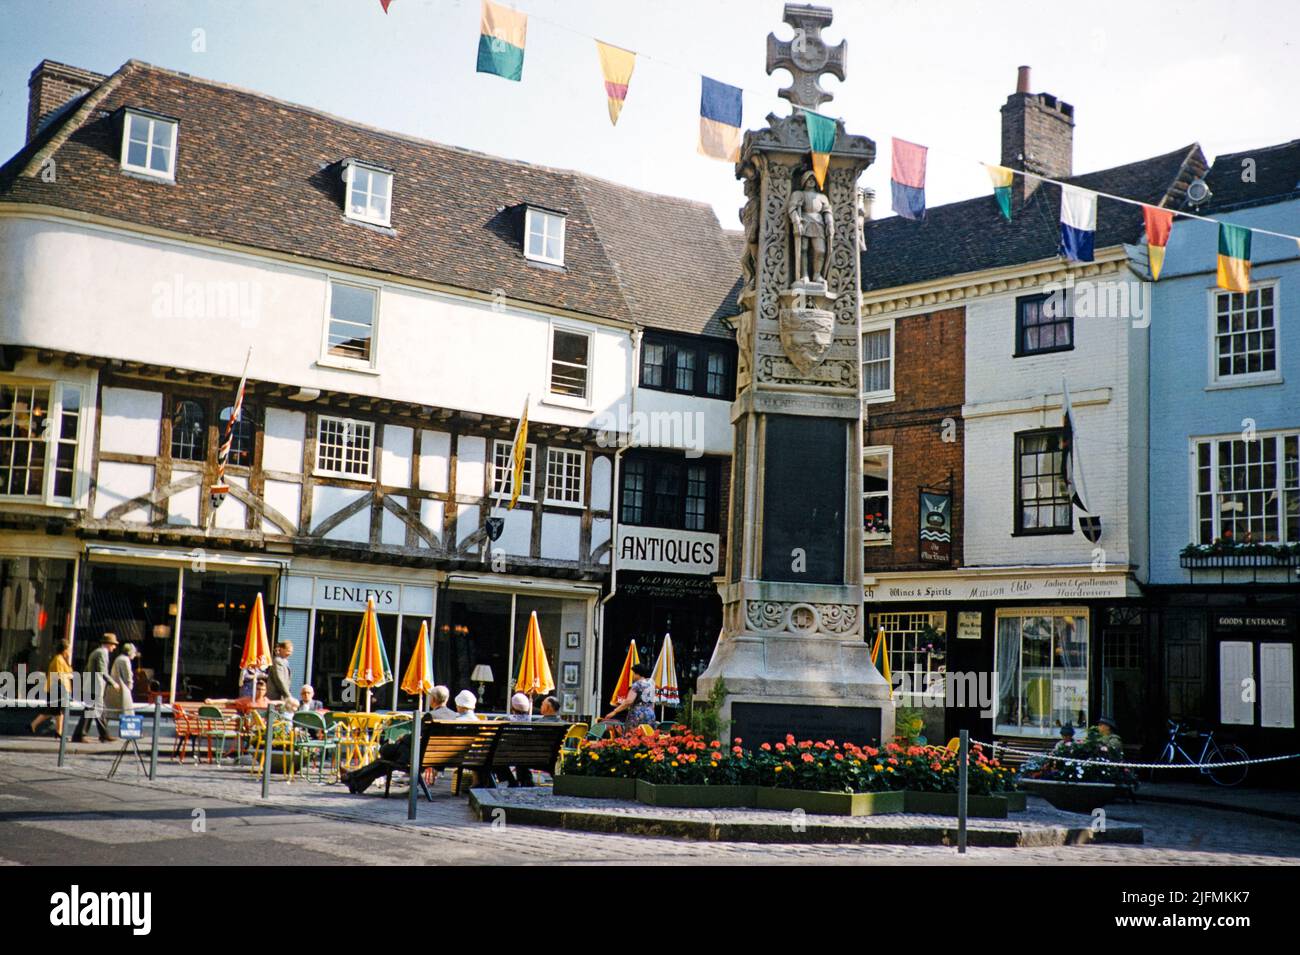 War Memorial and shops in historic buildings, Buttermarket, Canterbury, Kent, England, UK early 1960s Stock Photo